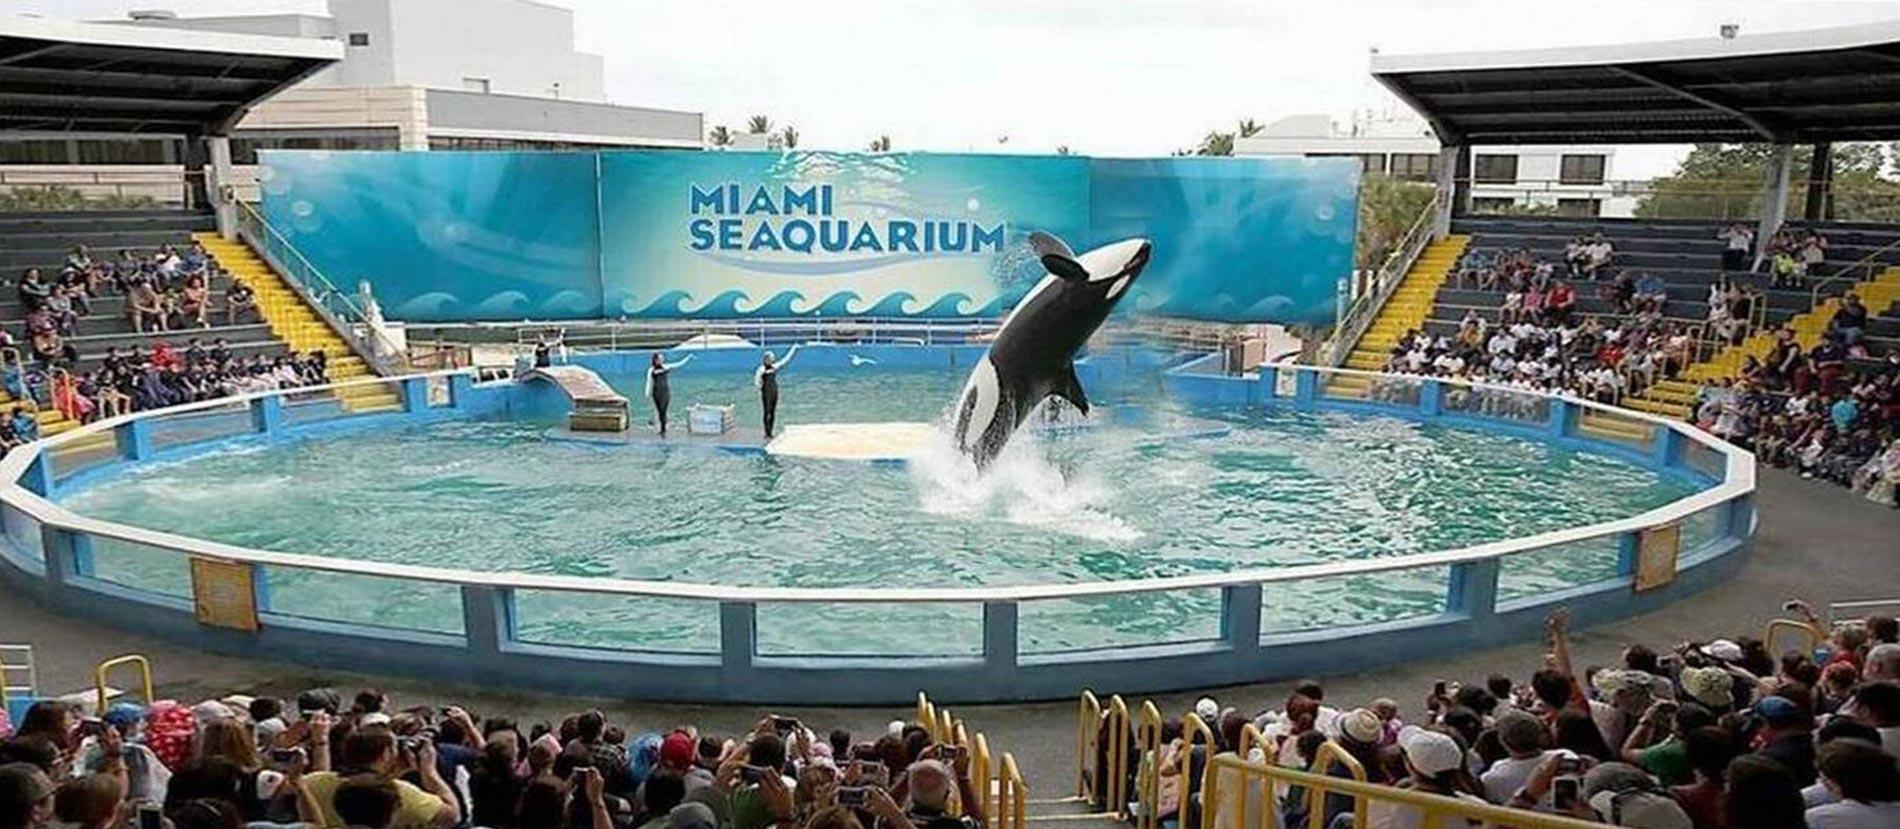 Threat to Wild Orcas, Dolphins and Beluga Whales from Marine Theme Park Boom in China